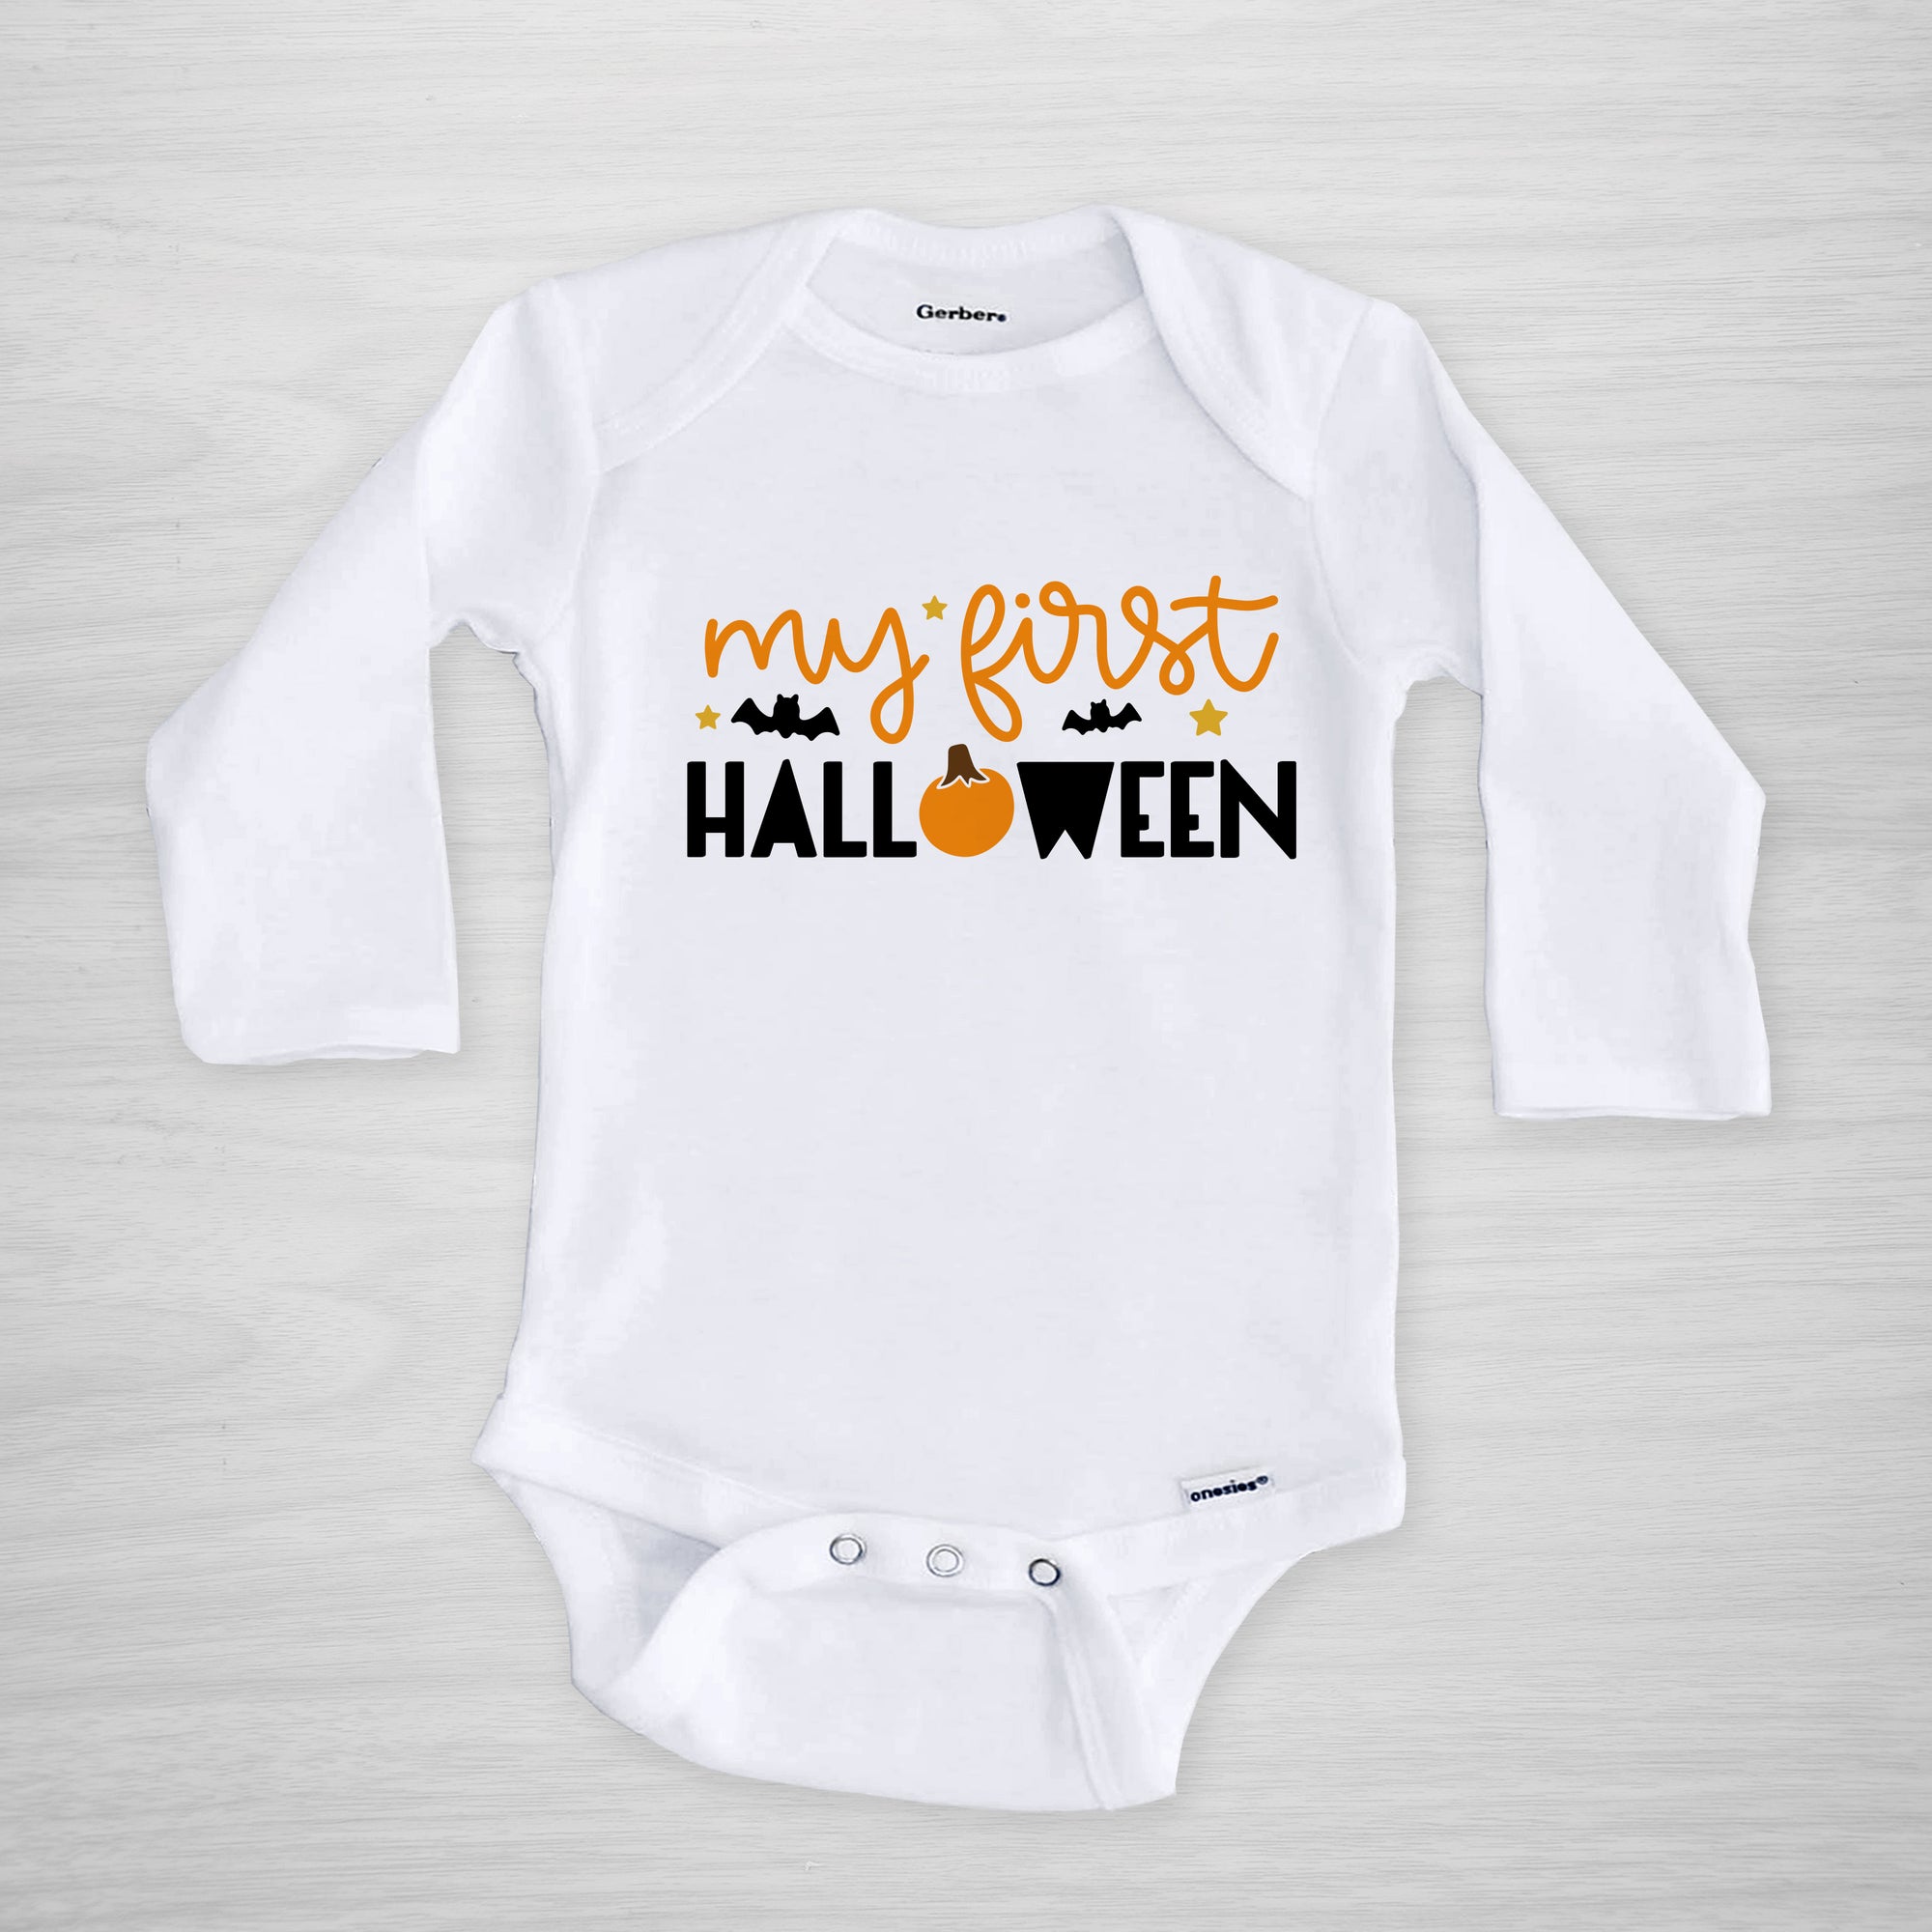 My First Halloween Gerber Onesie, long sleeved, from Pipsy.com